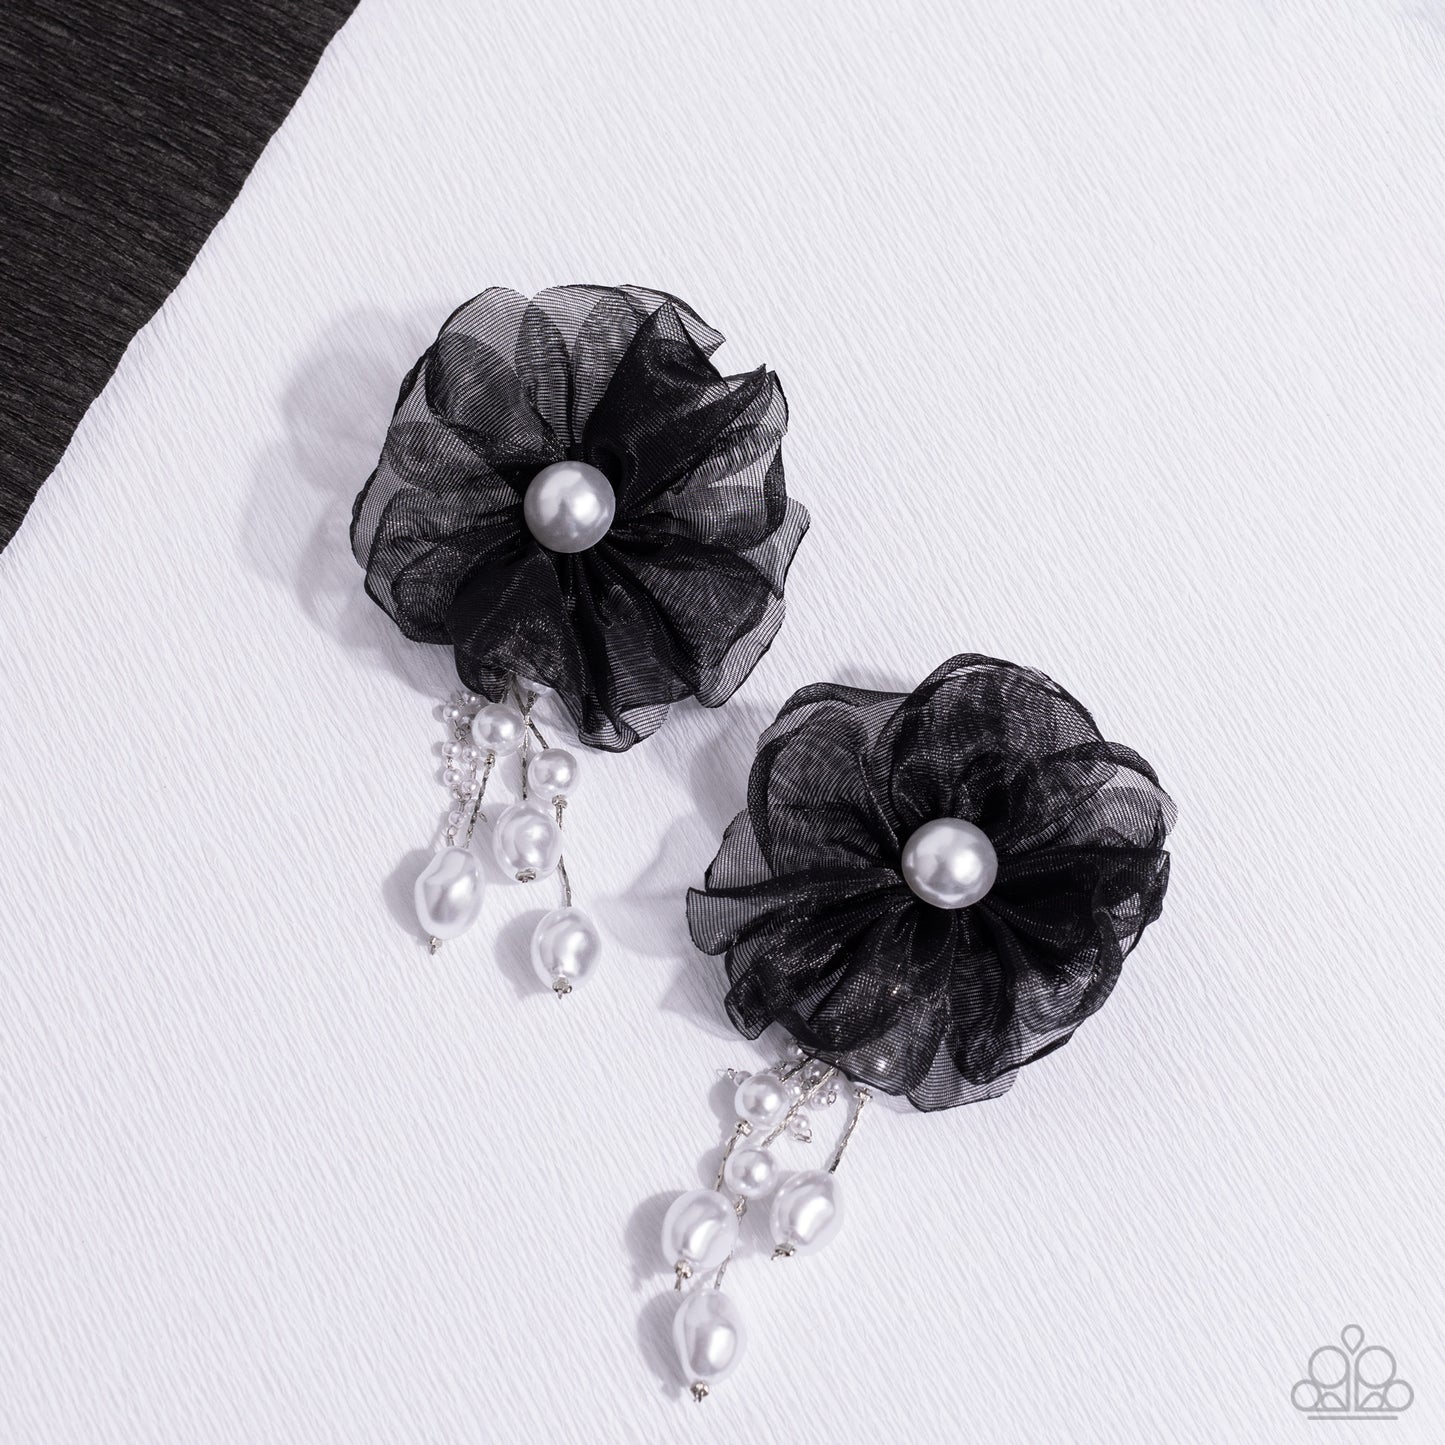 Dripping in Decadence - Black Earring